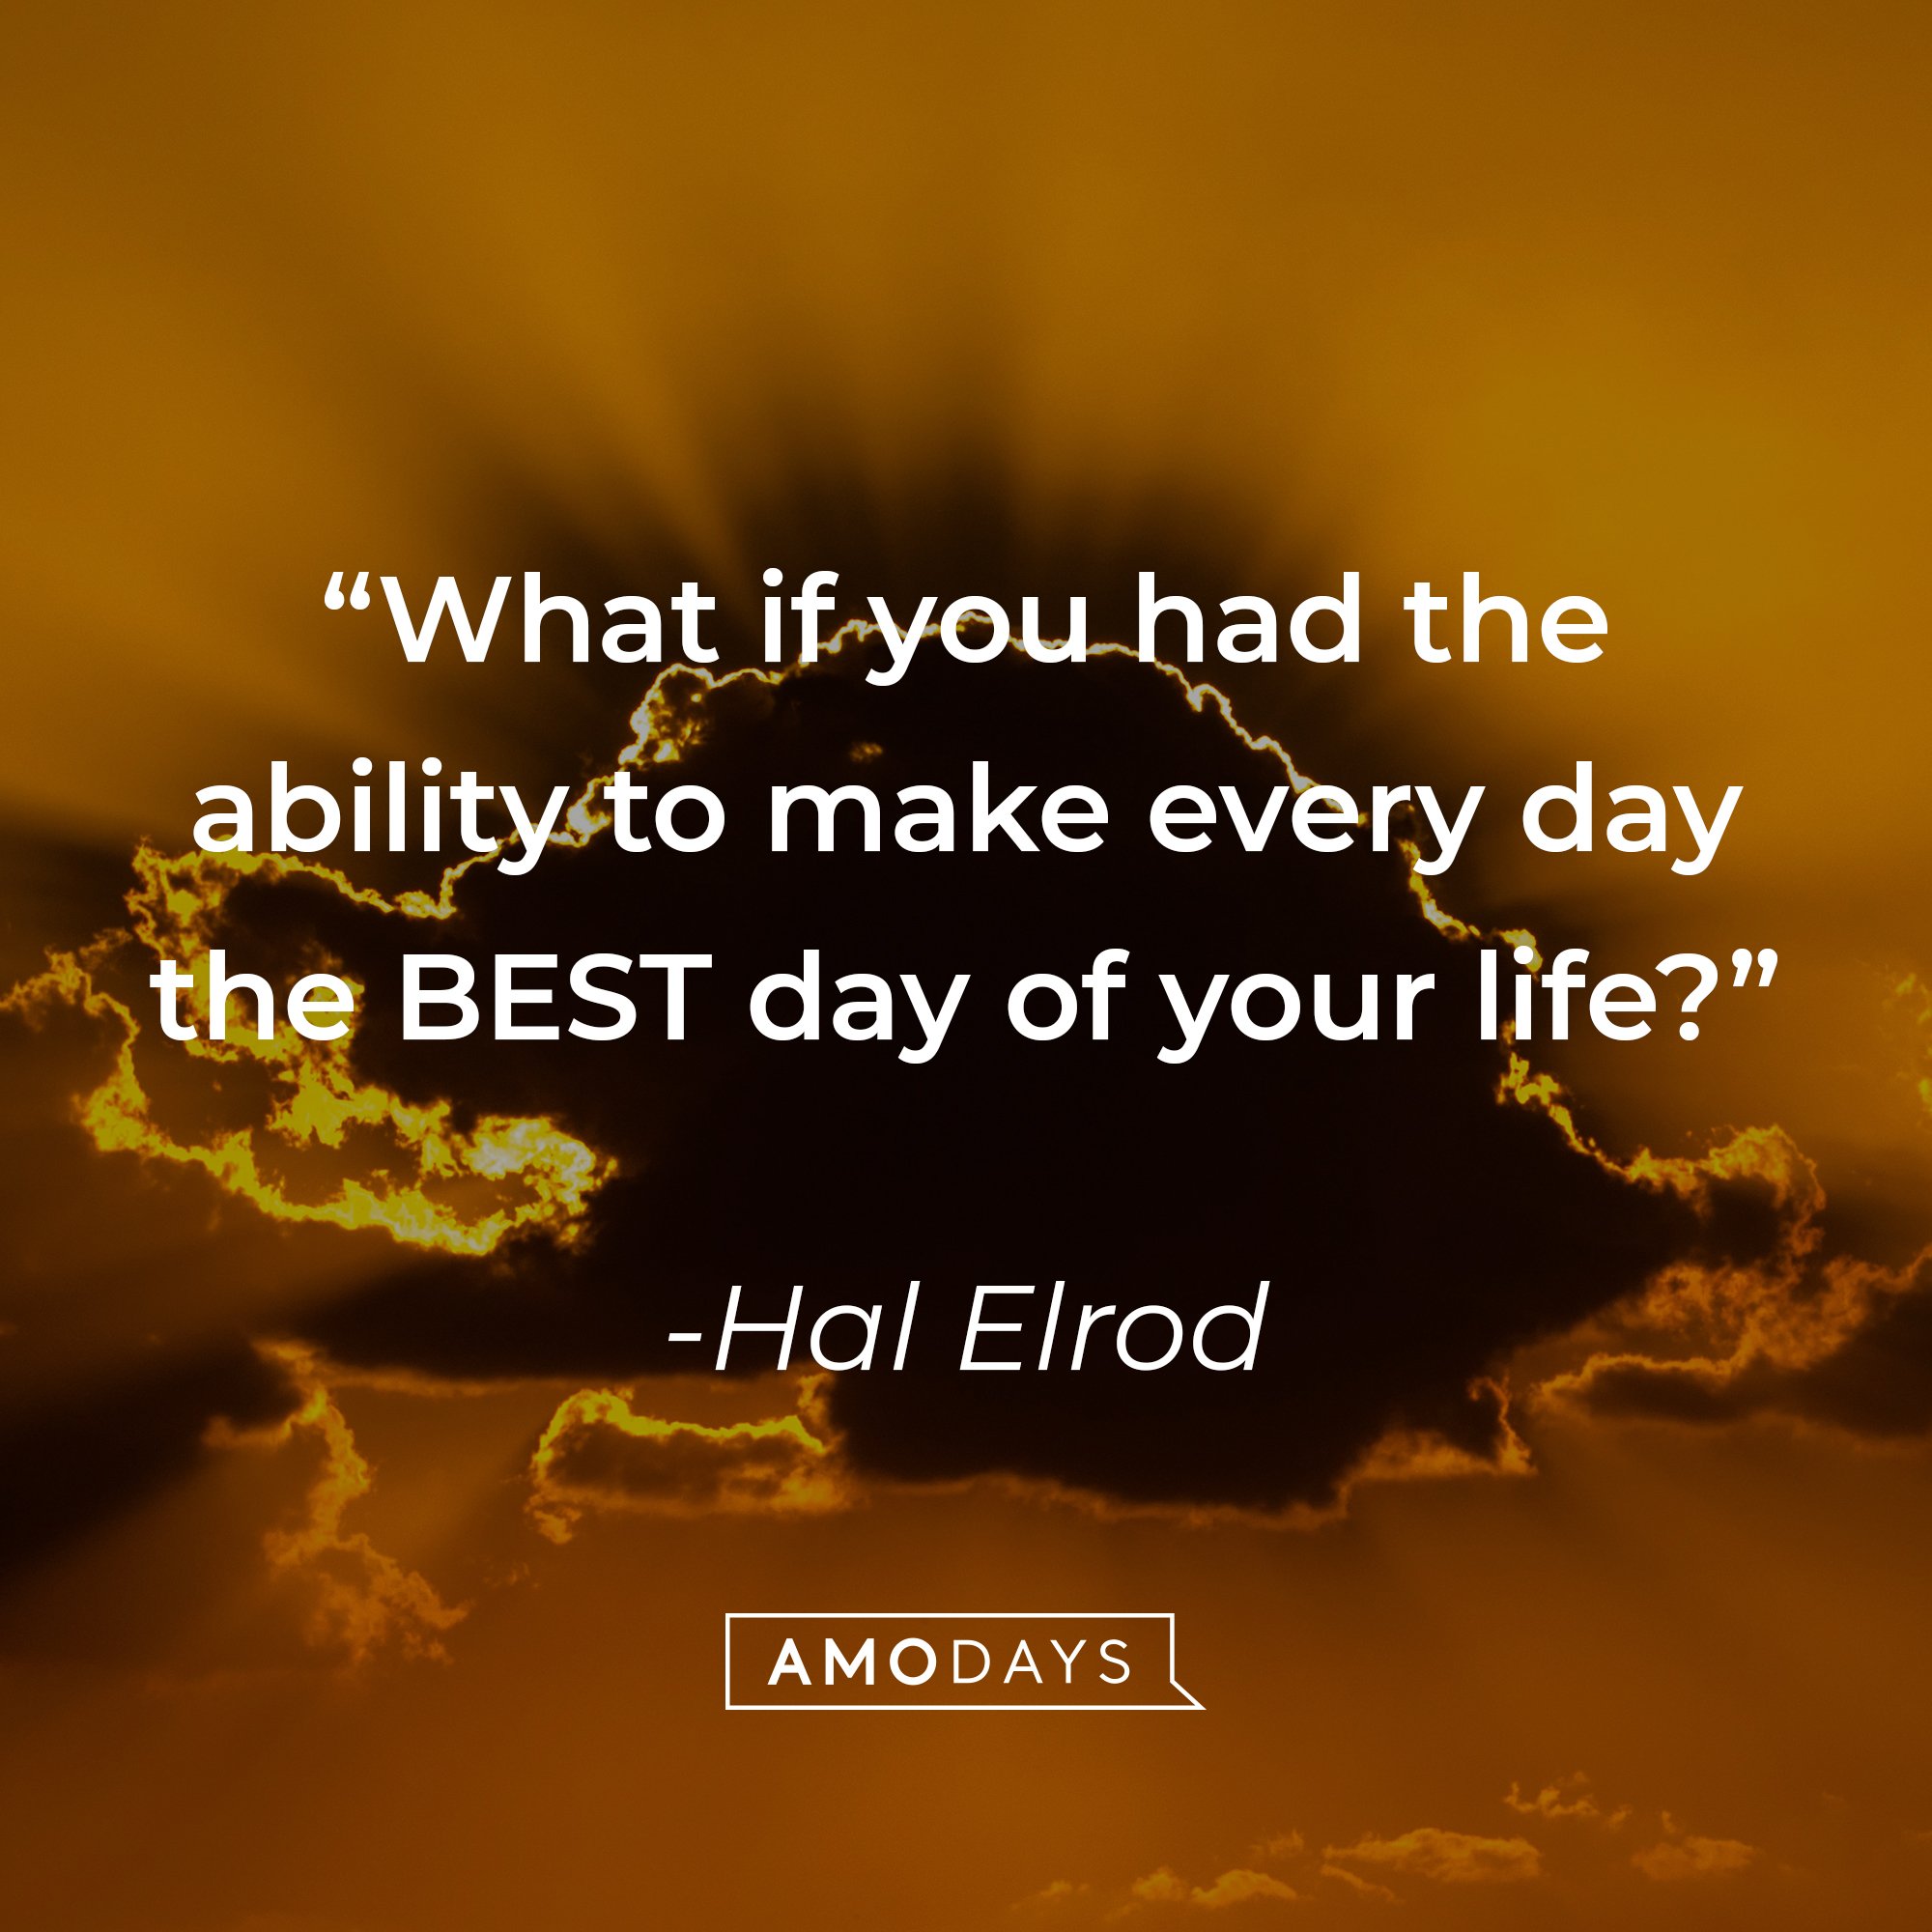 Hal Elrod's quote: "What if you had the ability to make every day the BEST day of your life?" | Image: AmoDays